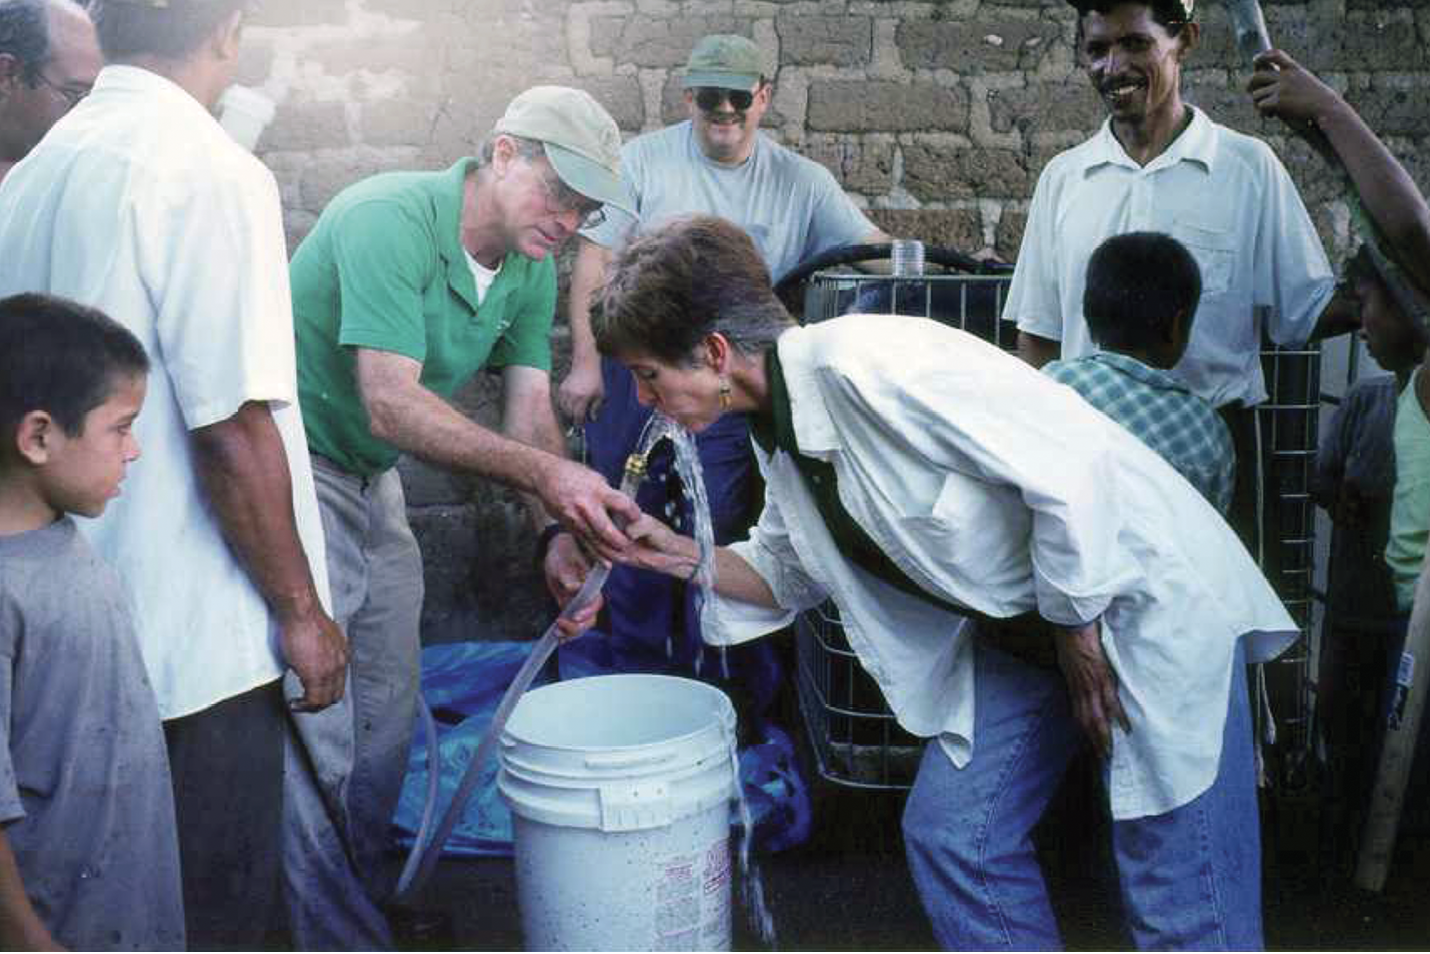 By taking the first sip, Molly Greene assured residents in Honduras that water from the River of Death was safe to drink after being treated.